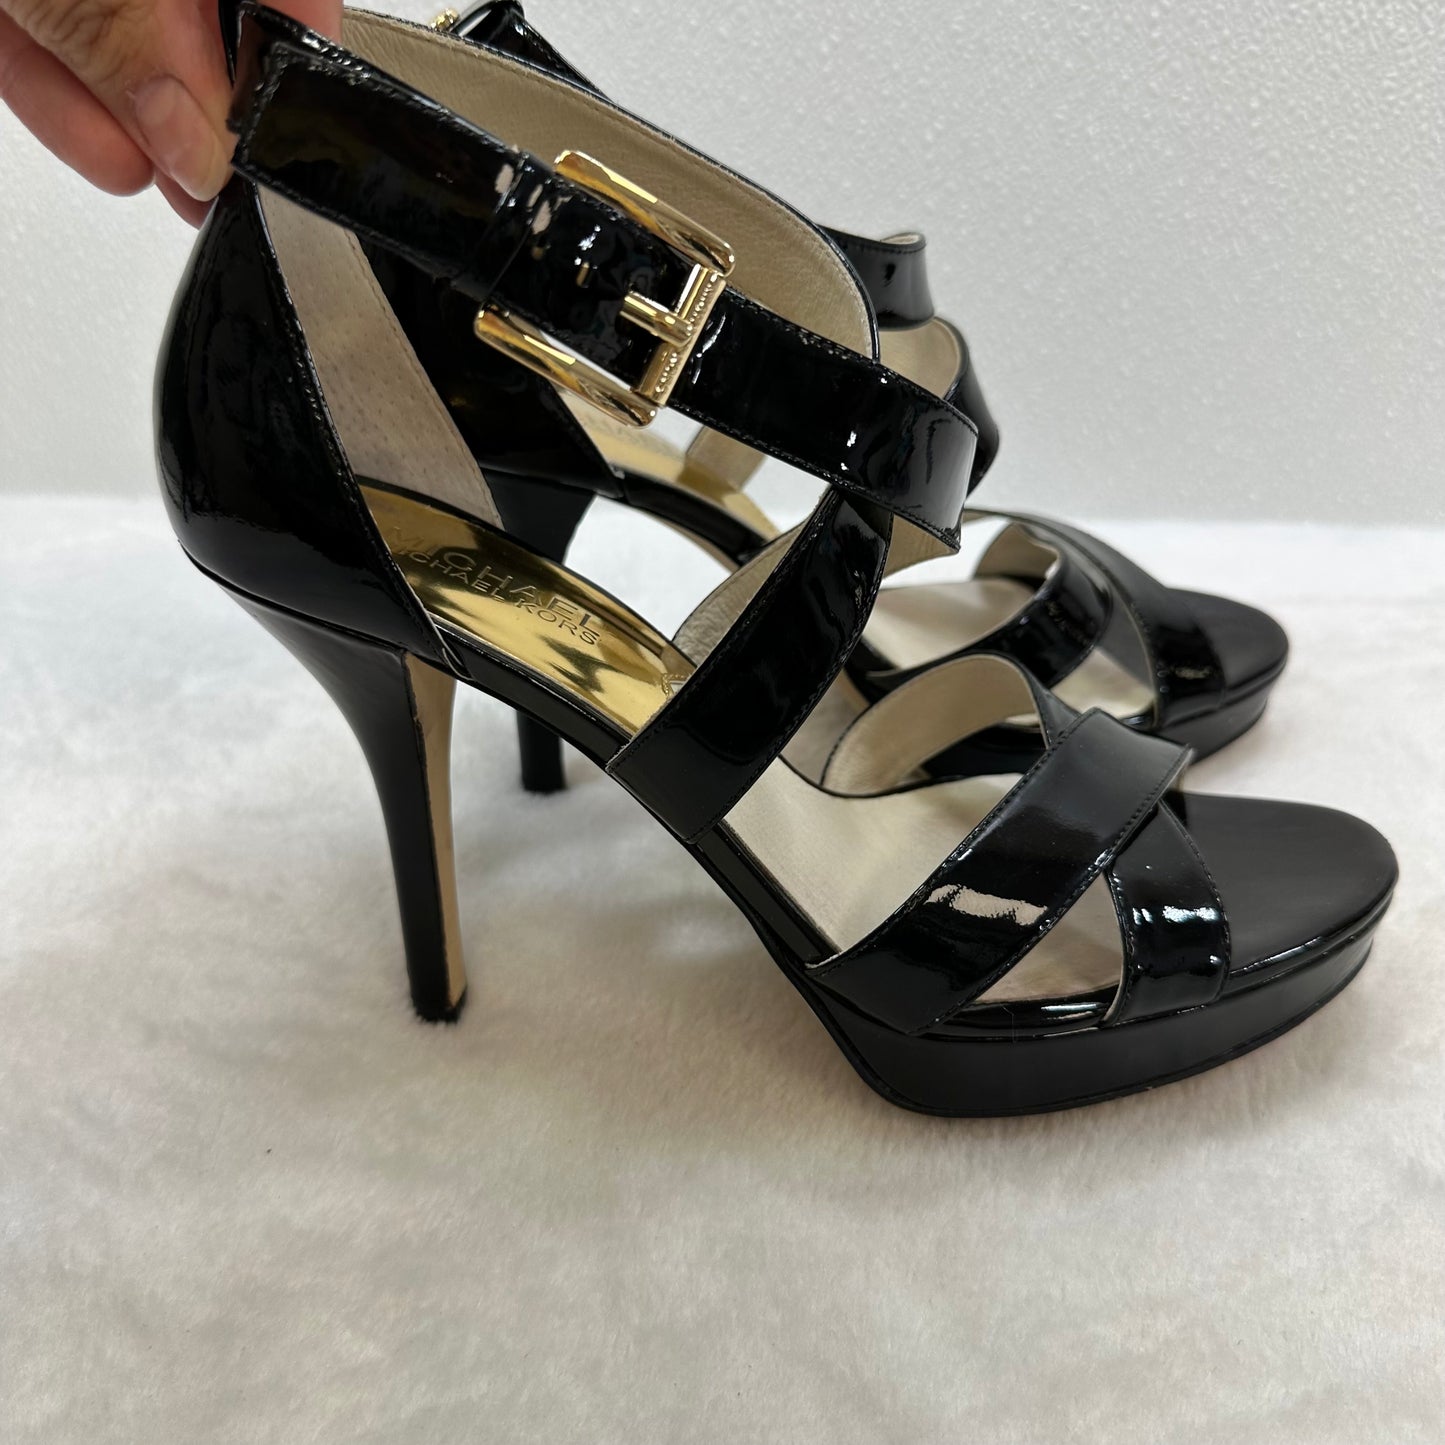 Sandals Heels Stiletto By Michael By Michael Kors  Size: 8.5